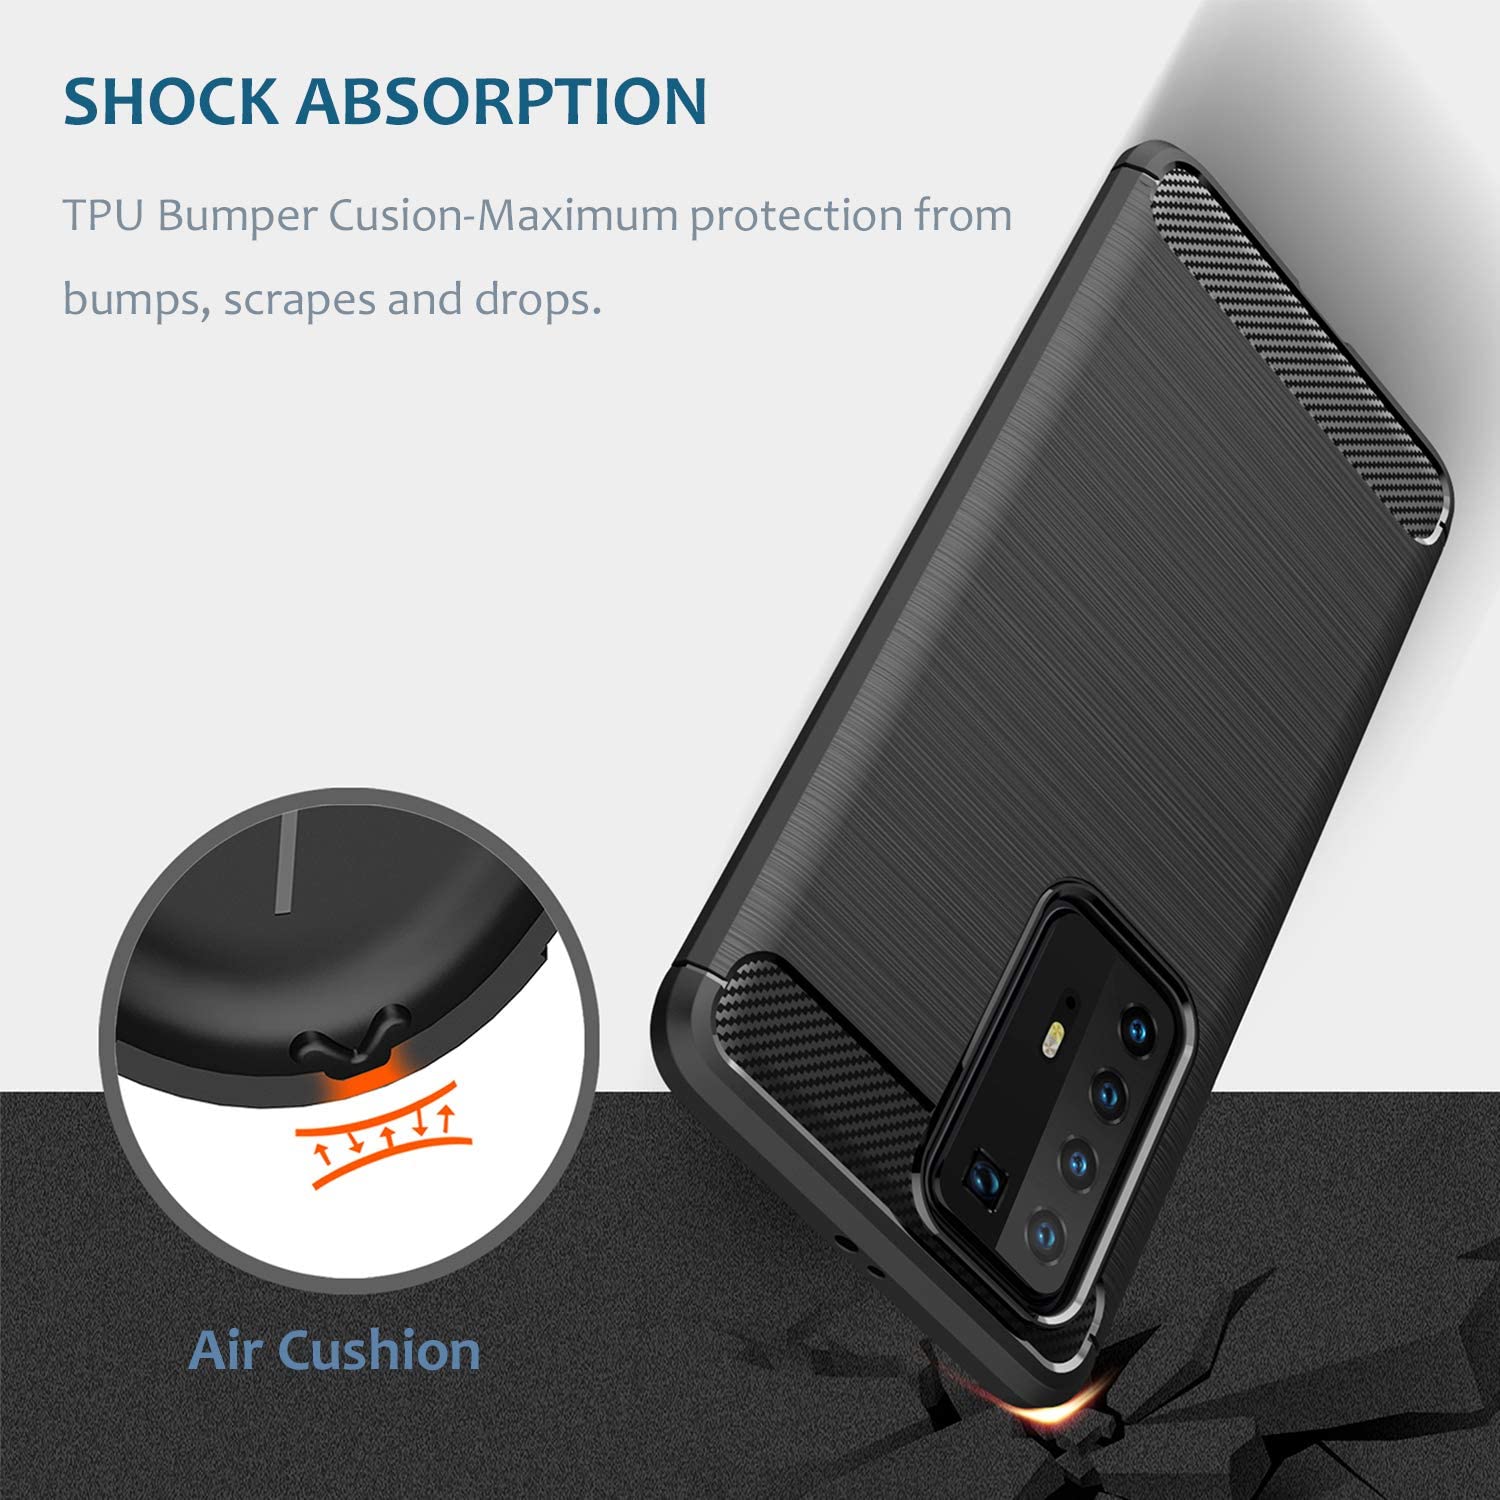 Shockproof Silicone Carbon Fibre Case Cover For Huawei Mate 20